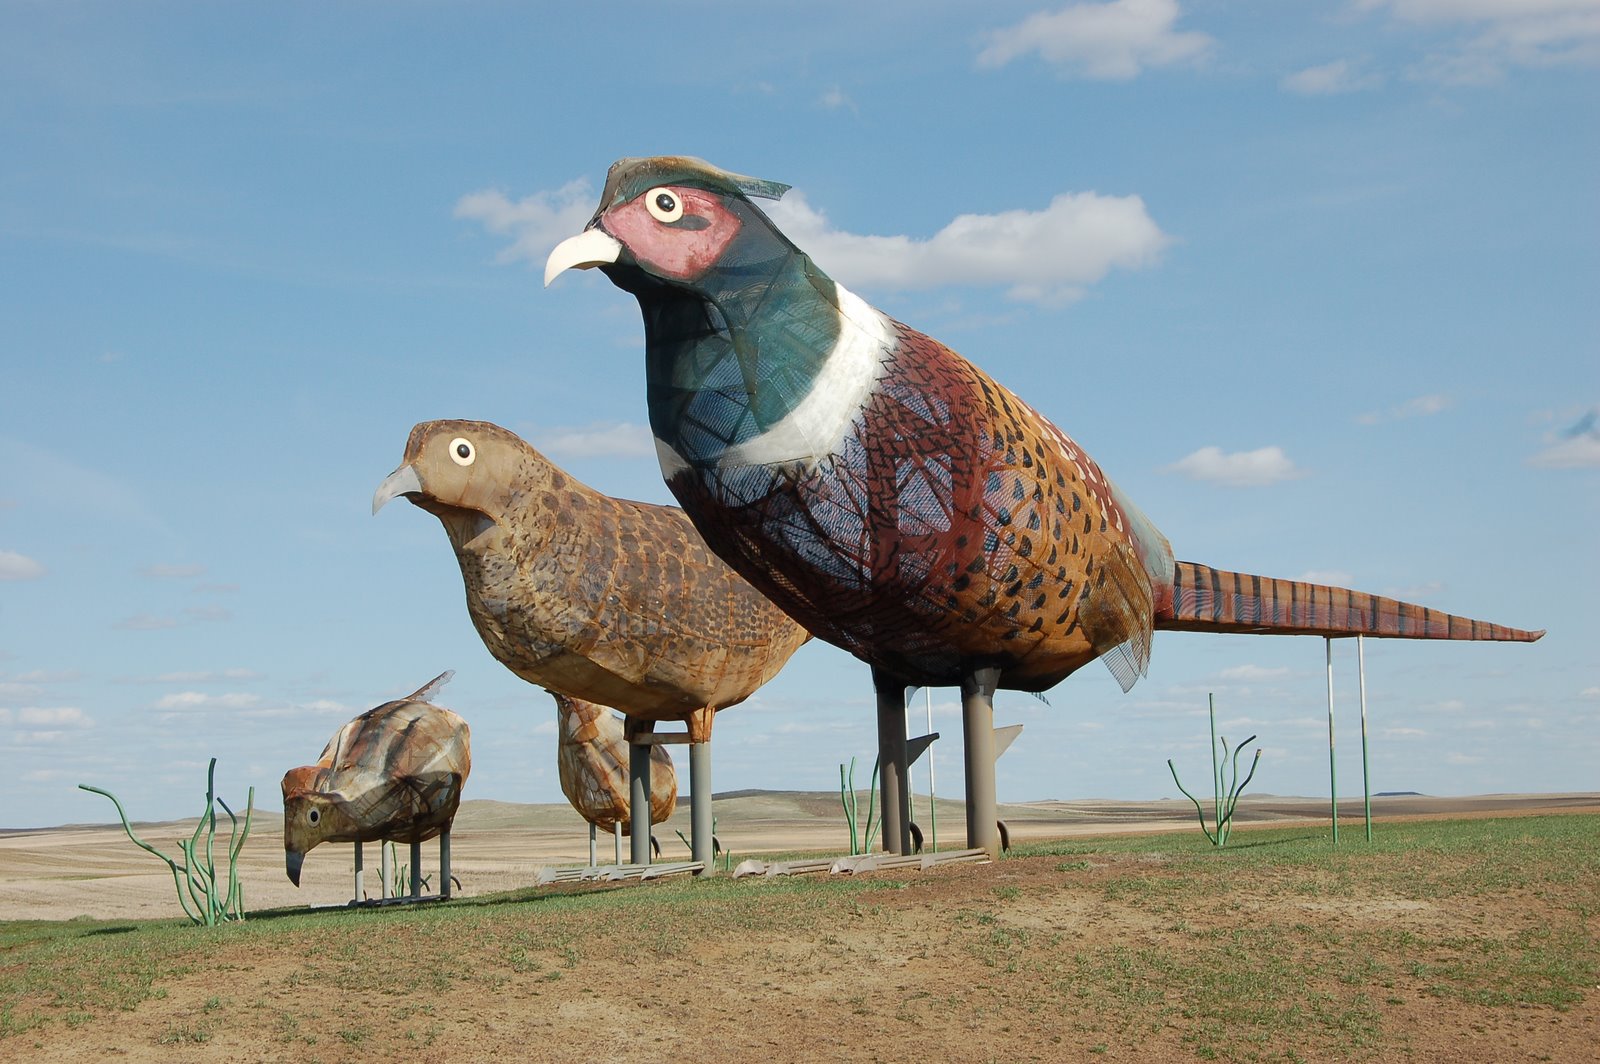 REAL quails were flocking to these statues, no lie!